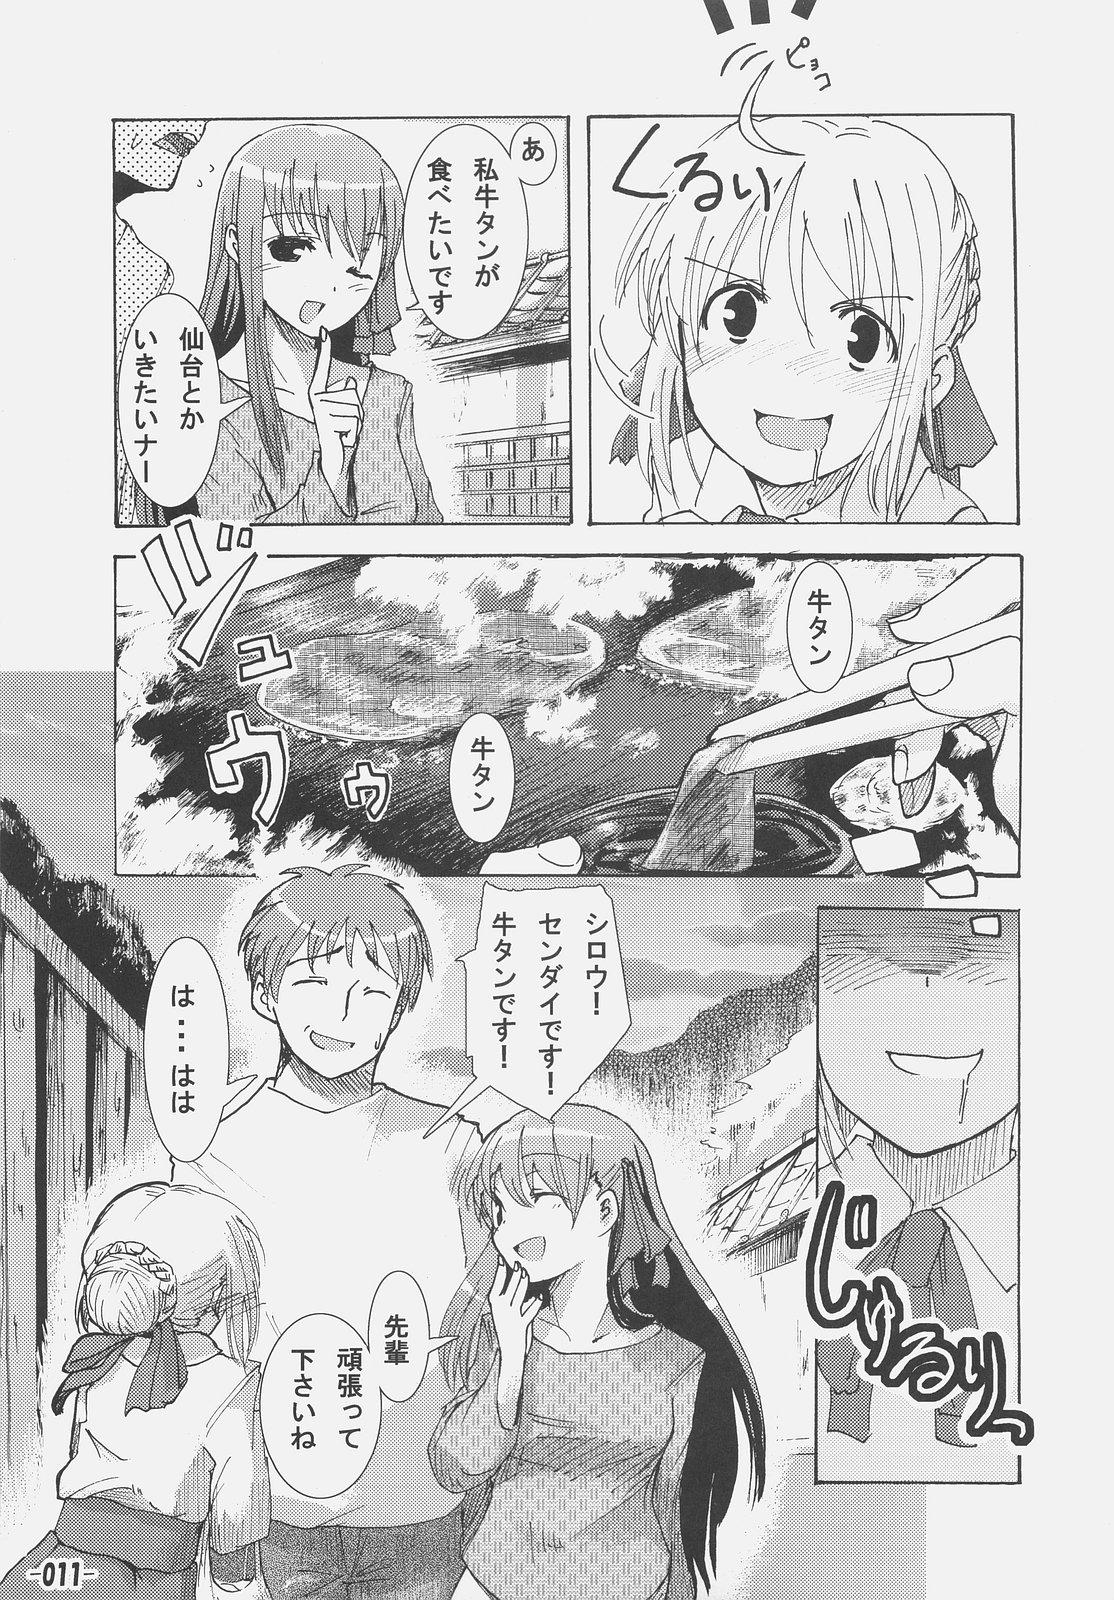 Cream Frenzy driving - Fate hollow ataraxia Play - Page 10